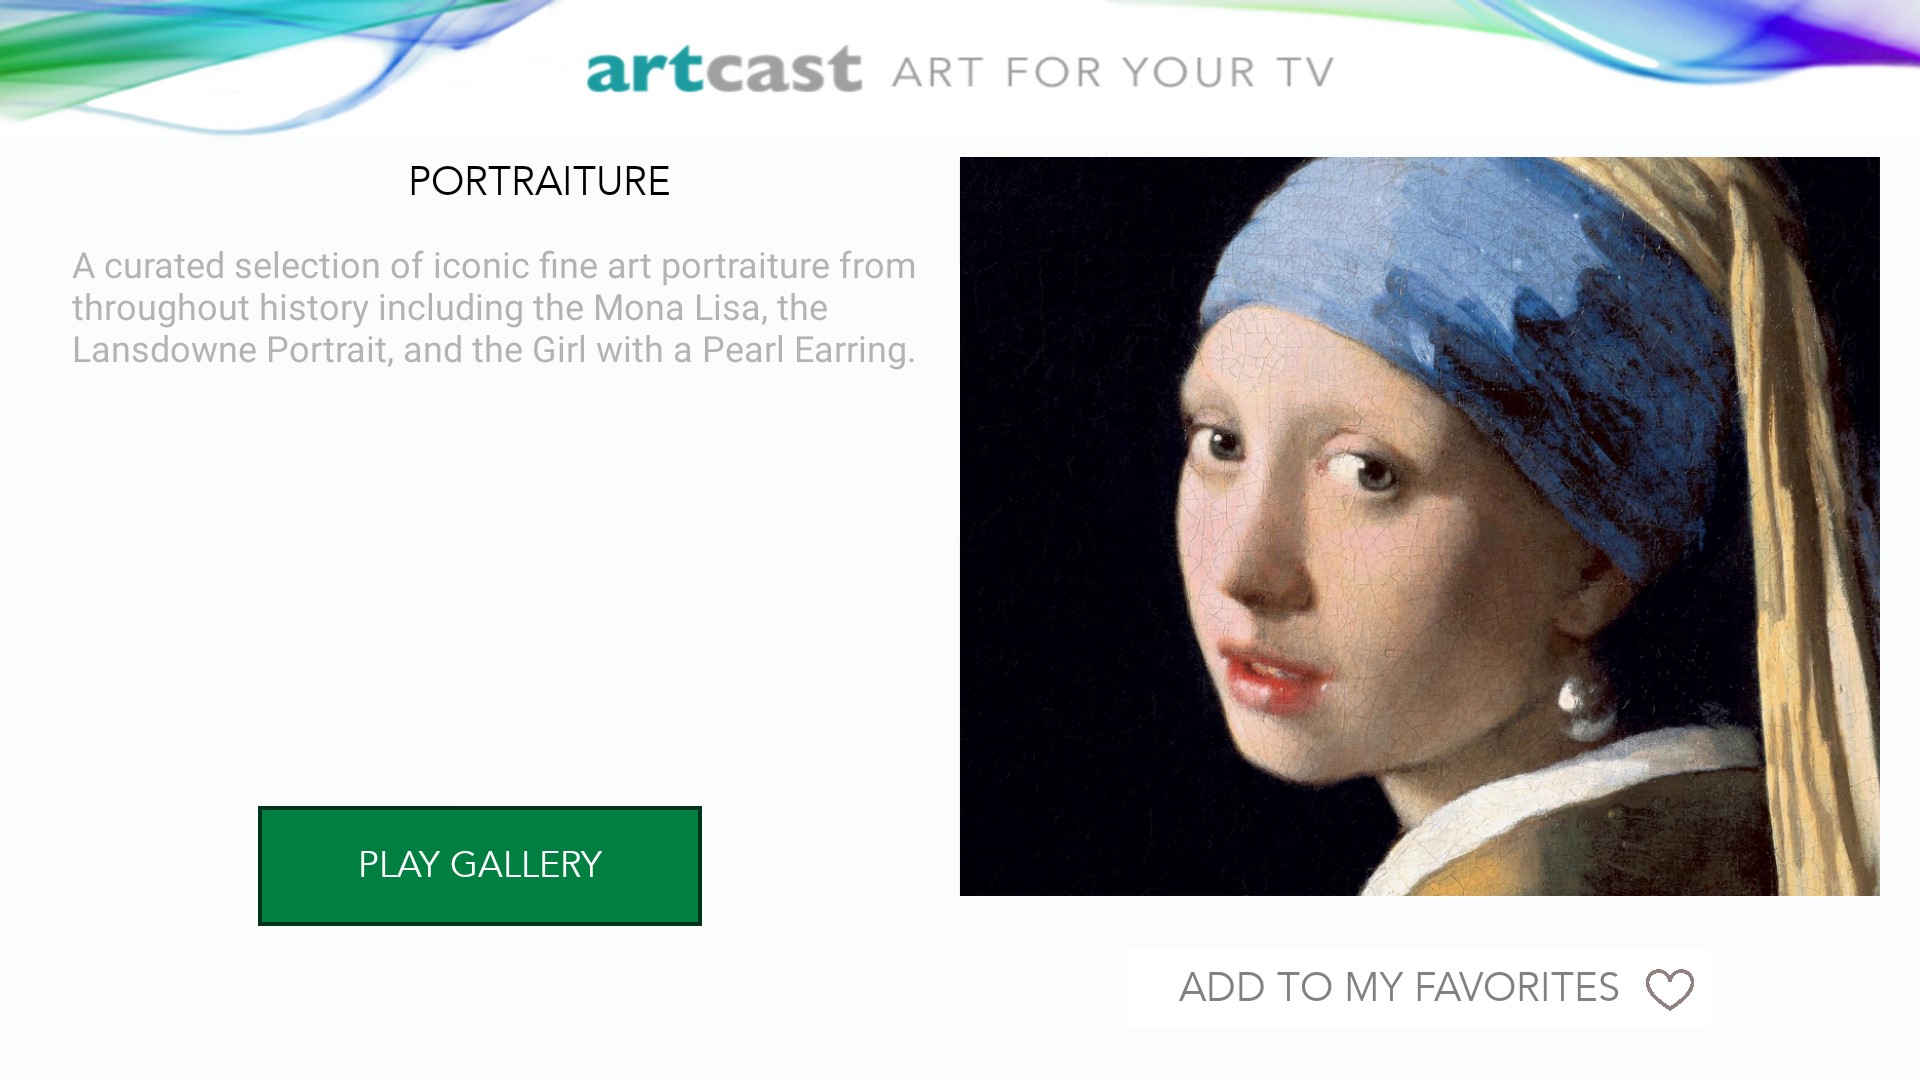 Turn Your Home Theater Into An Art Gallery With Artcast